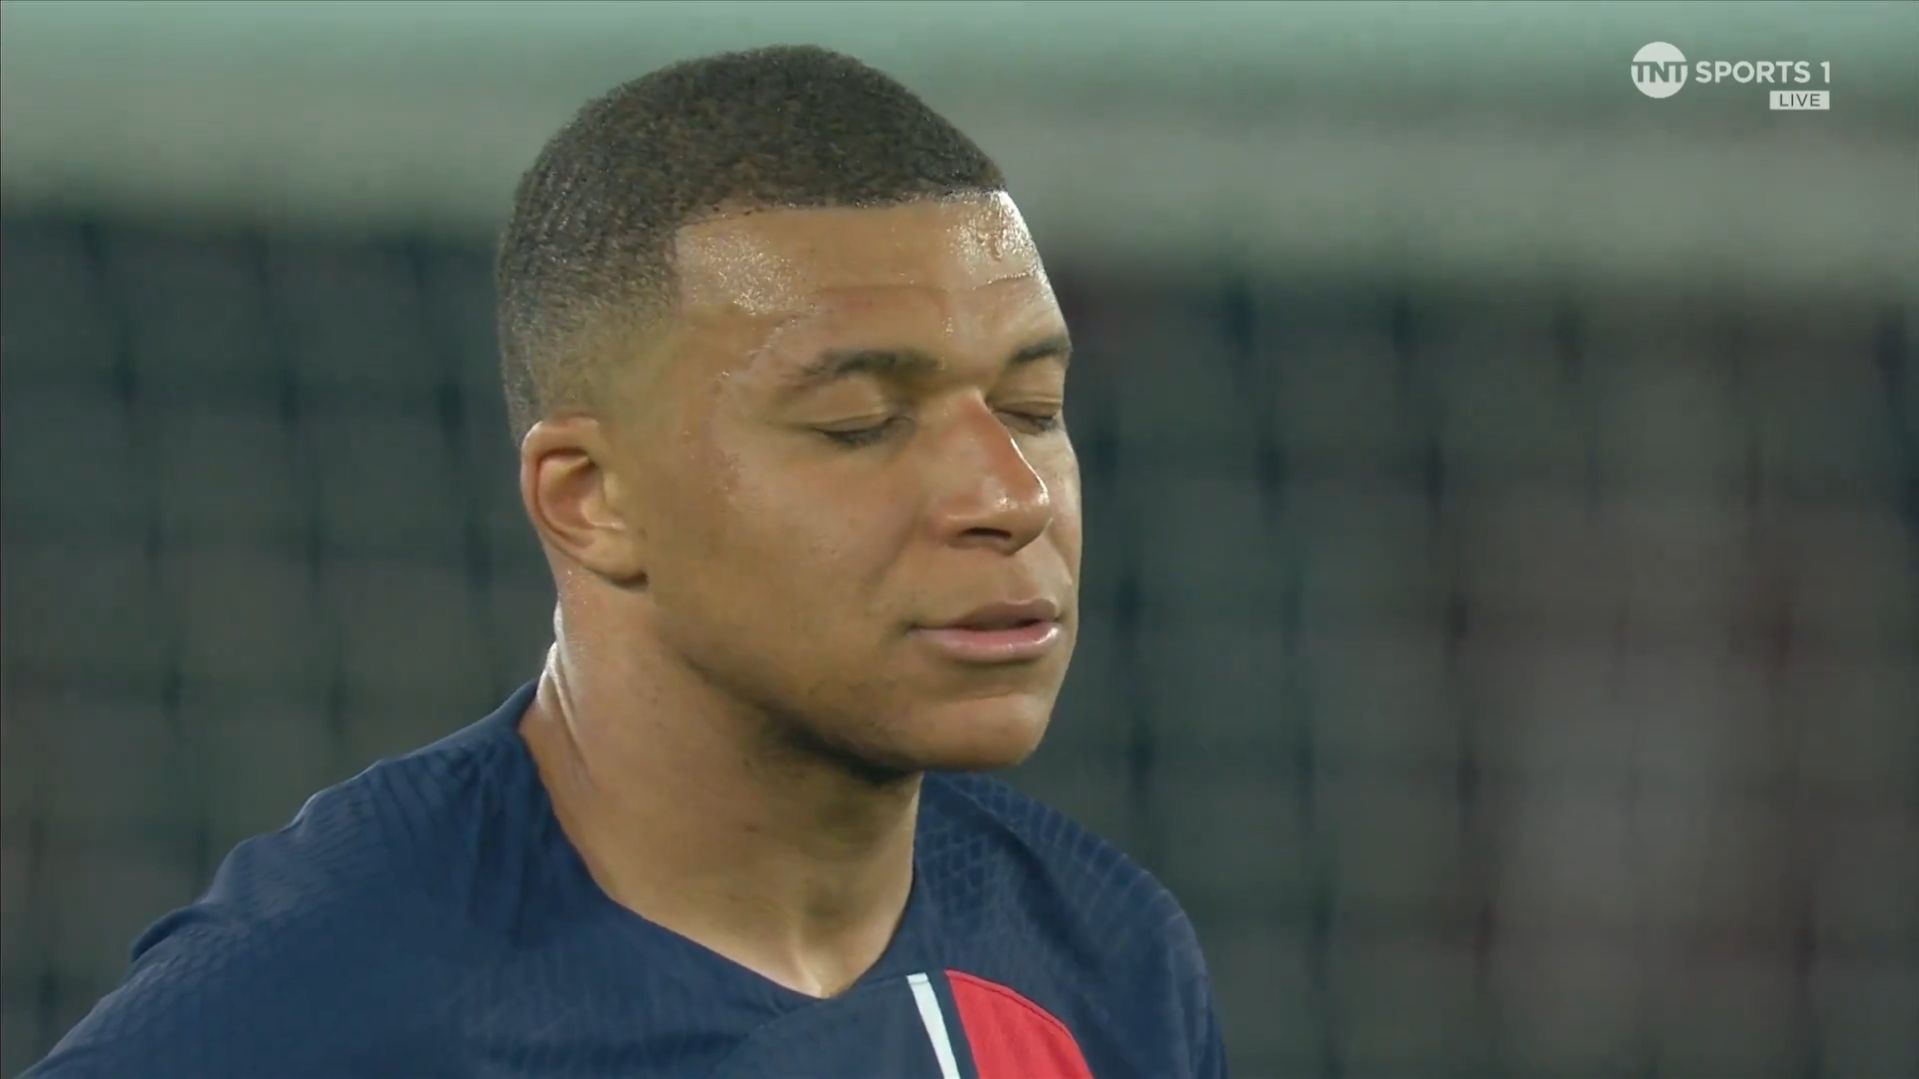 “You have destroyed…” – Journalist delivers vicious assessment of Kylian Mbappe following PSG’s Champions League exit